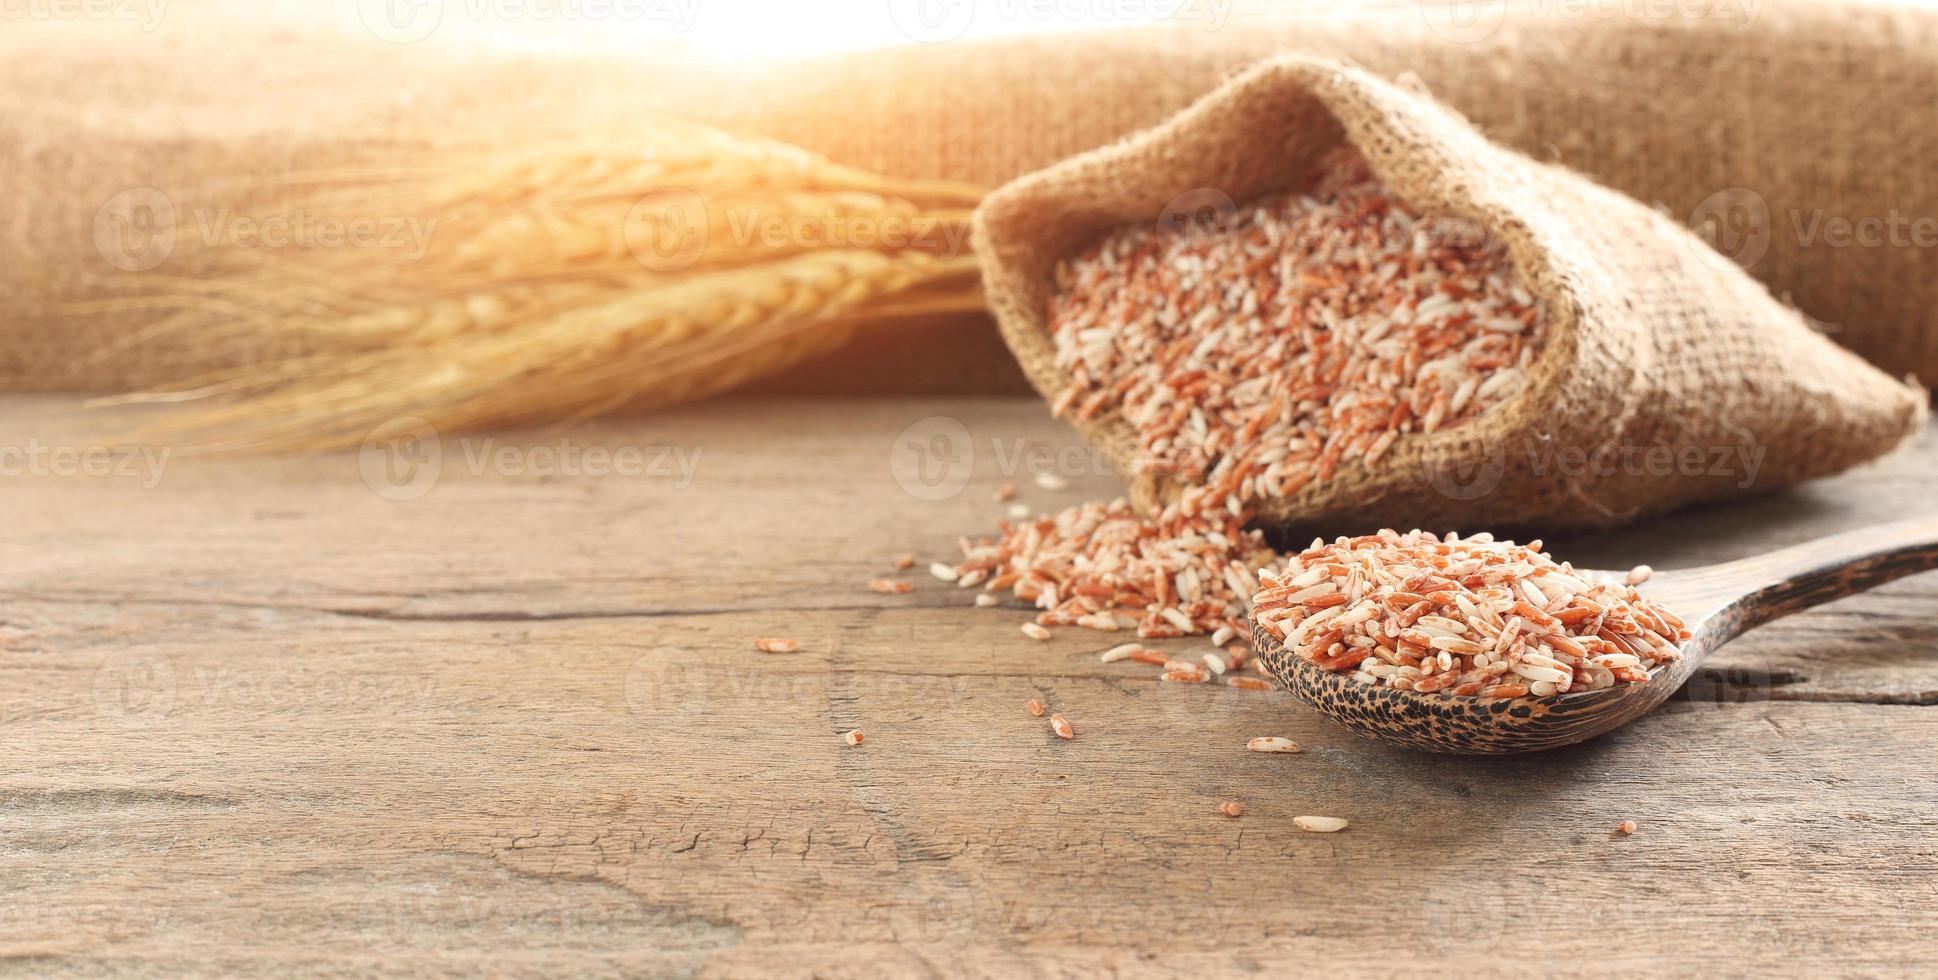 Healthy food - Close up spoon of red organic whole rice grain and brown sack on wooden table with ear  of paddy against shiny background photo